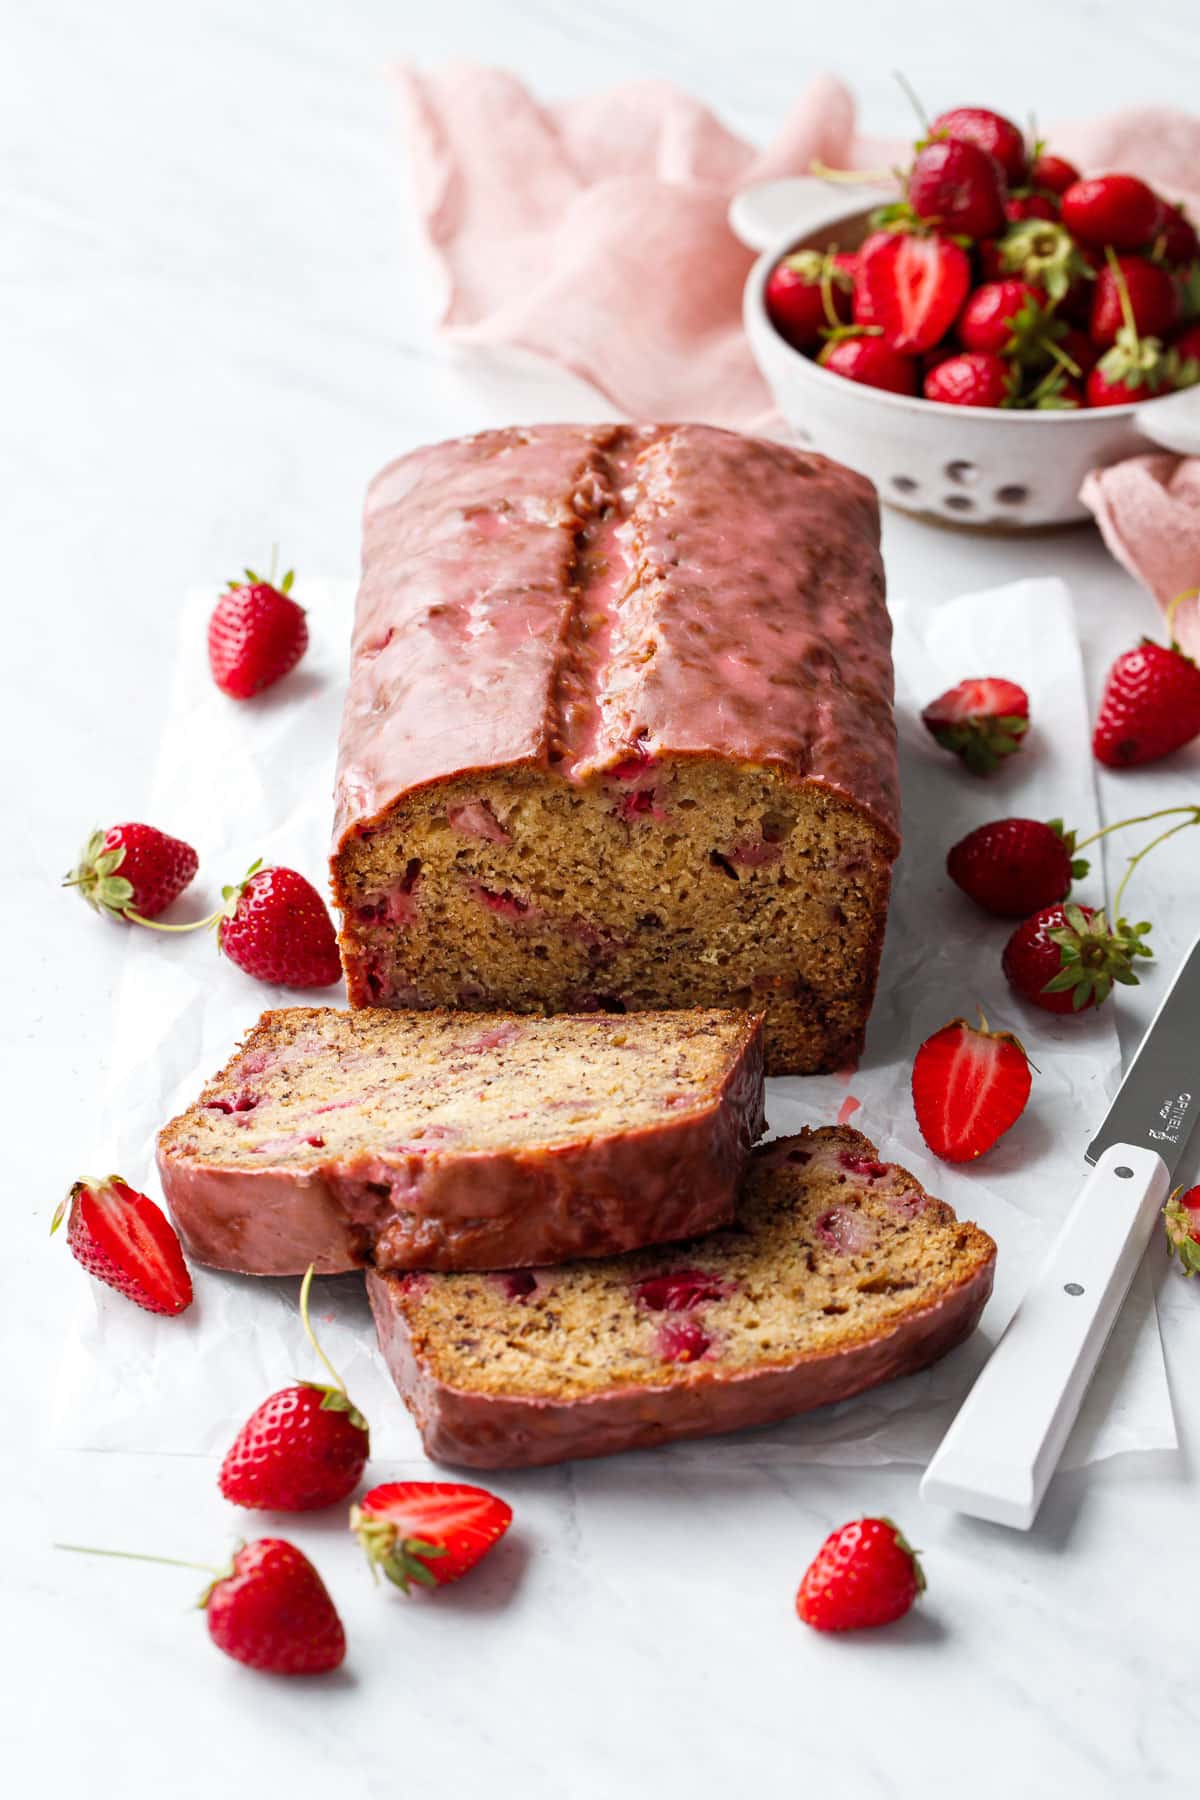 Loaf of Strawberry Banana Bread with a pink glaze, two slices laying down to show the interior texture, and strainer with strawberries in the background.